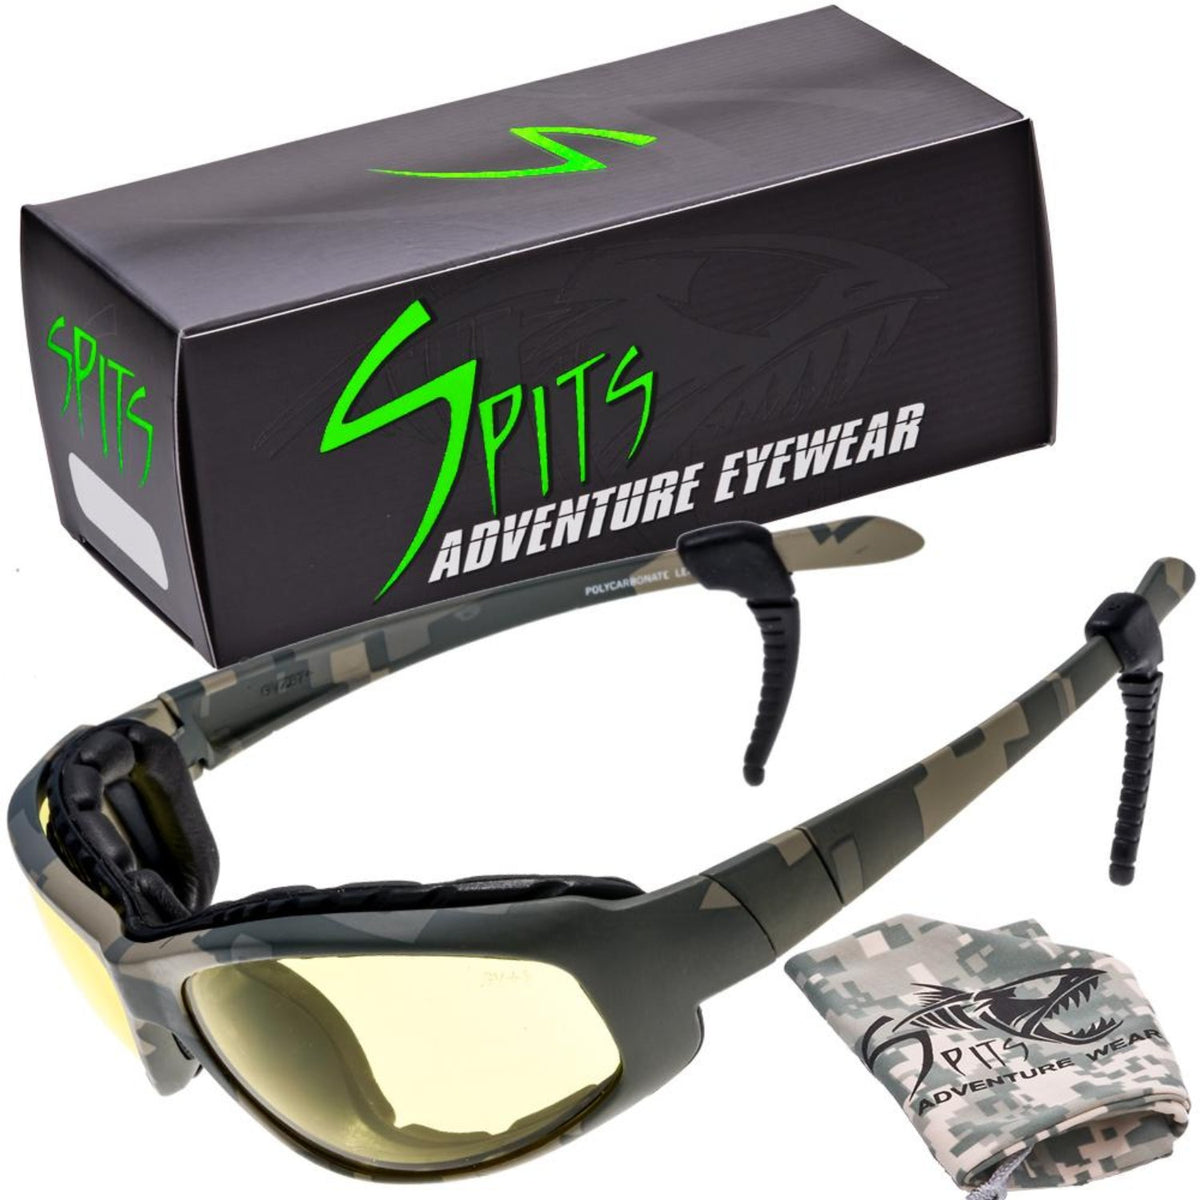 Sniper Camo Safety Rated Sunglasses Various Lens Color and Foam Padding Options